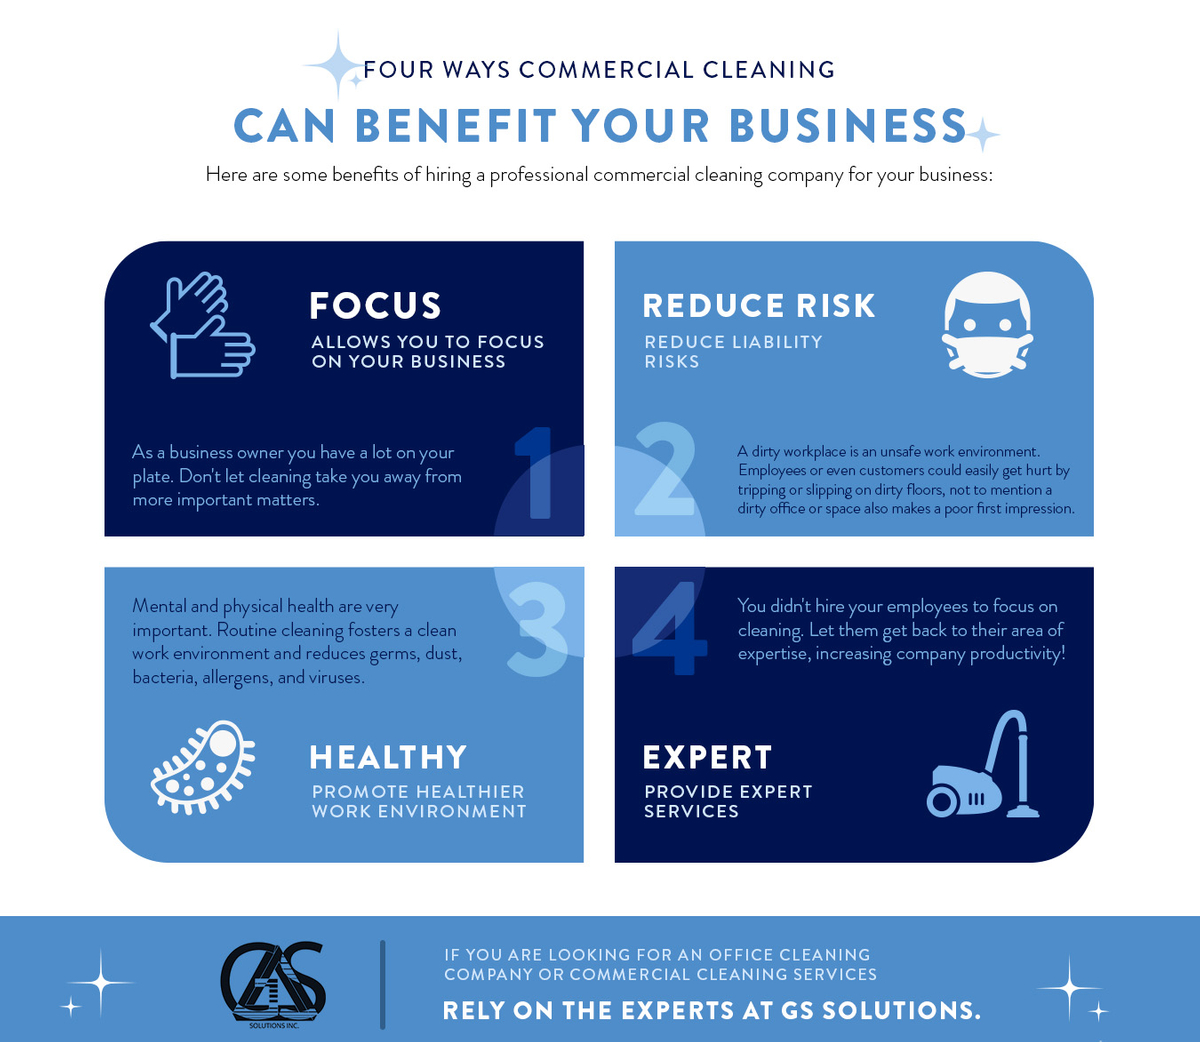 4 Ways Commercial Cleaning Can Benefit Your Business IG.jpg